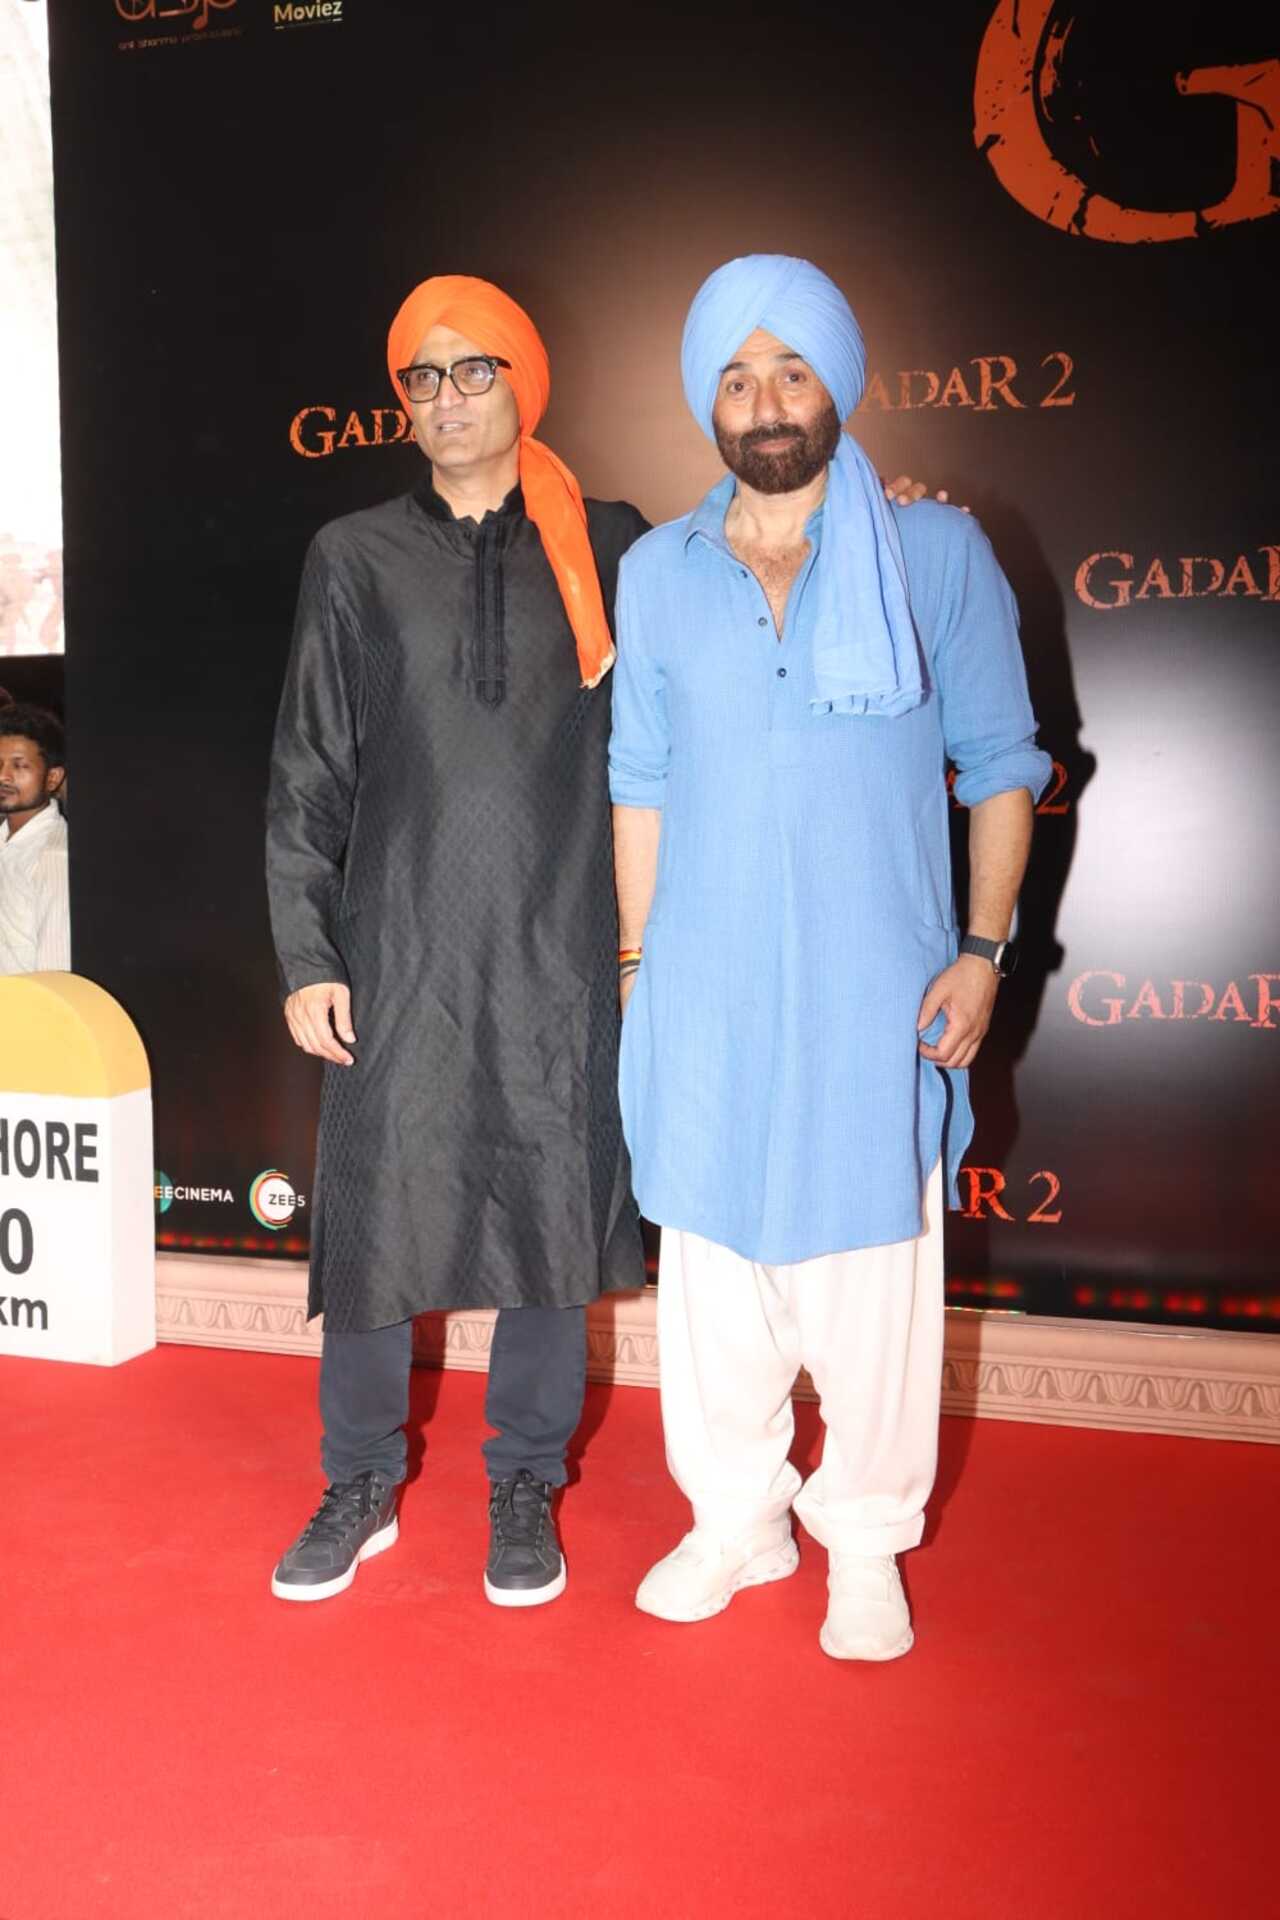 Director Anil Sharma poses with his leading man Sunny Deol